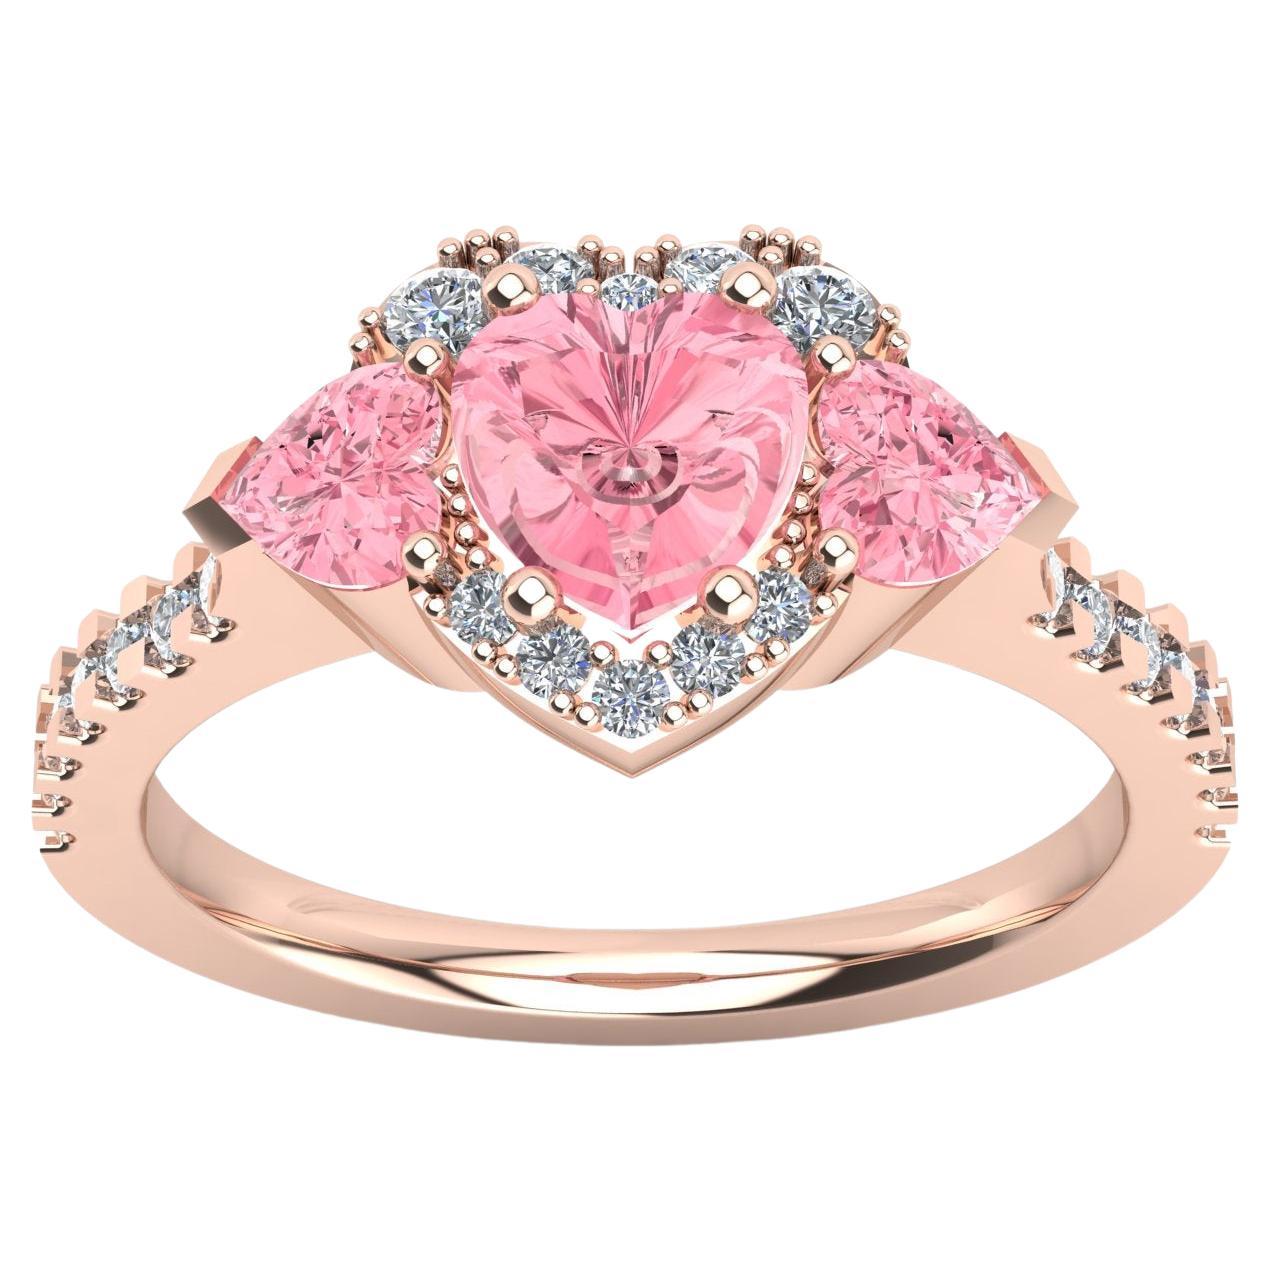 Heart Ring with Pink Sapphires and Diamonds, 18 Karat Rose Gold, Made in Italy